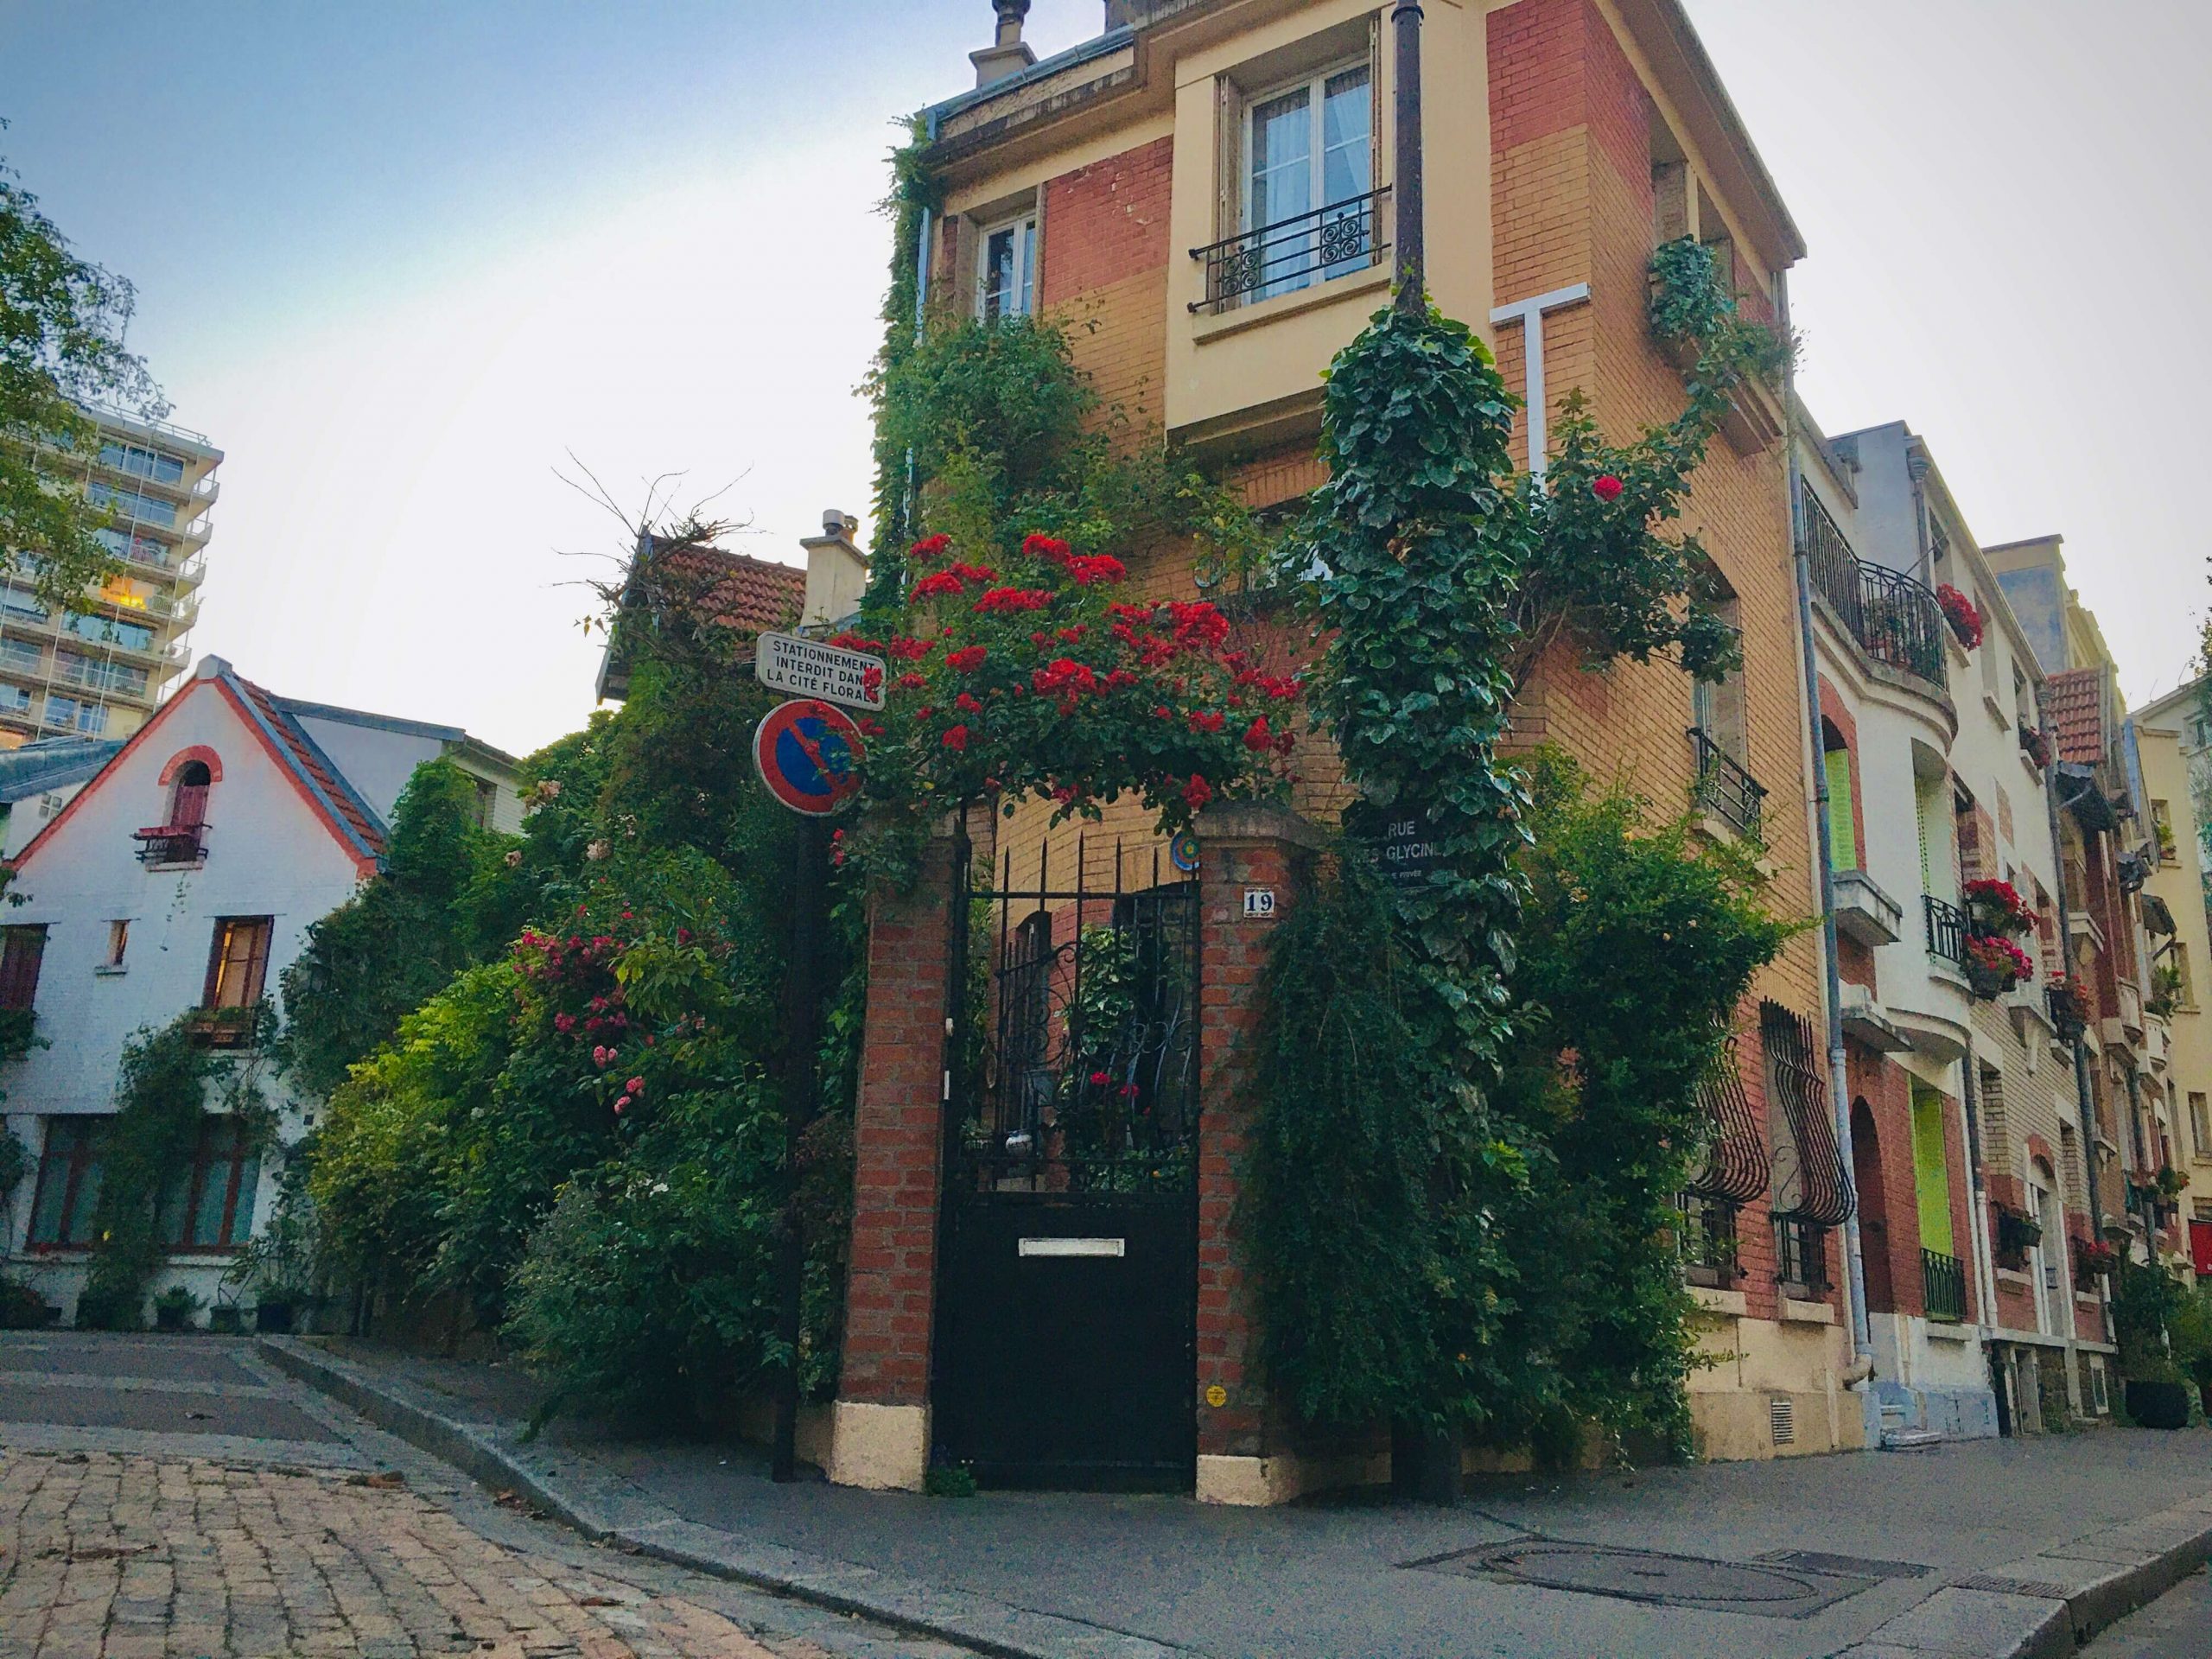 House on a corner with many flowers and vines climbing up the front